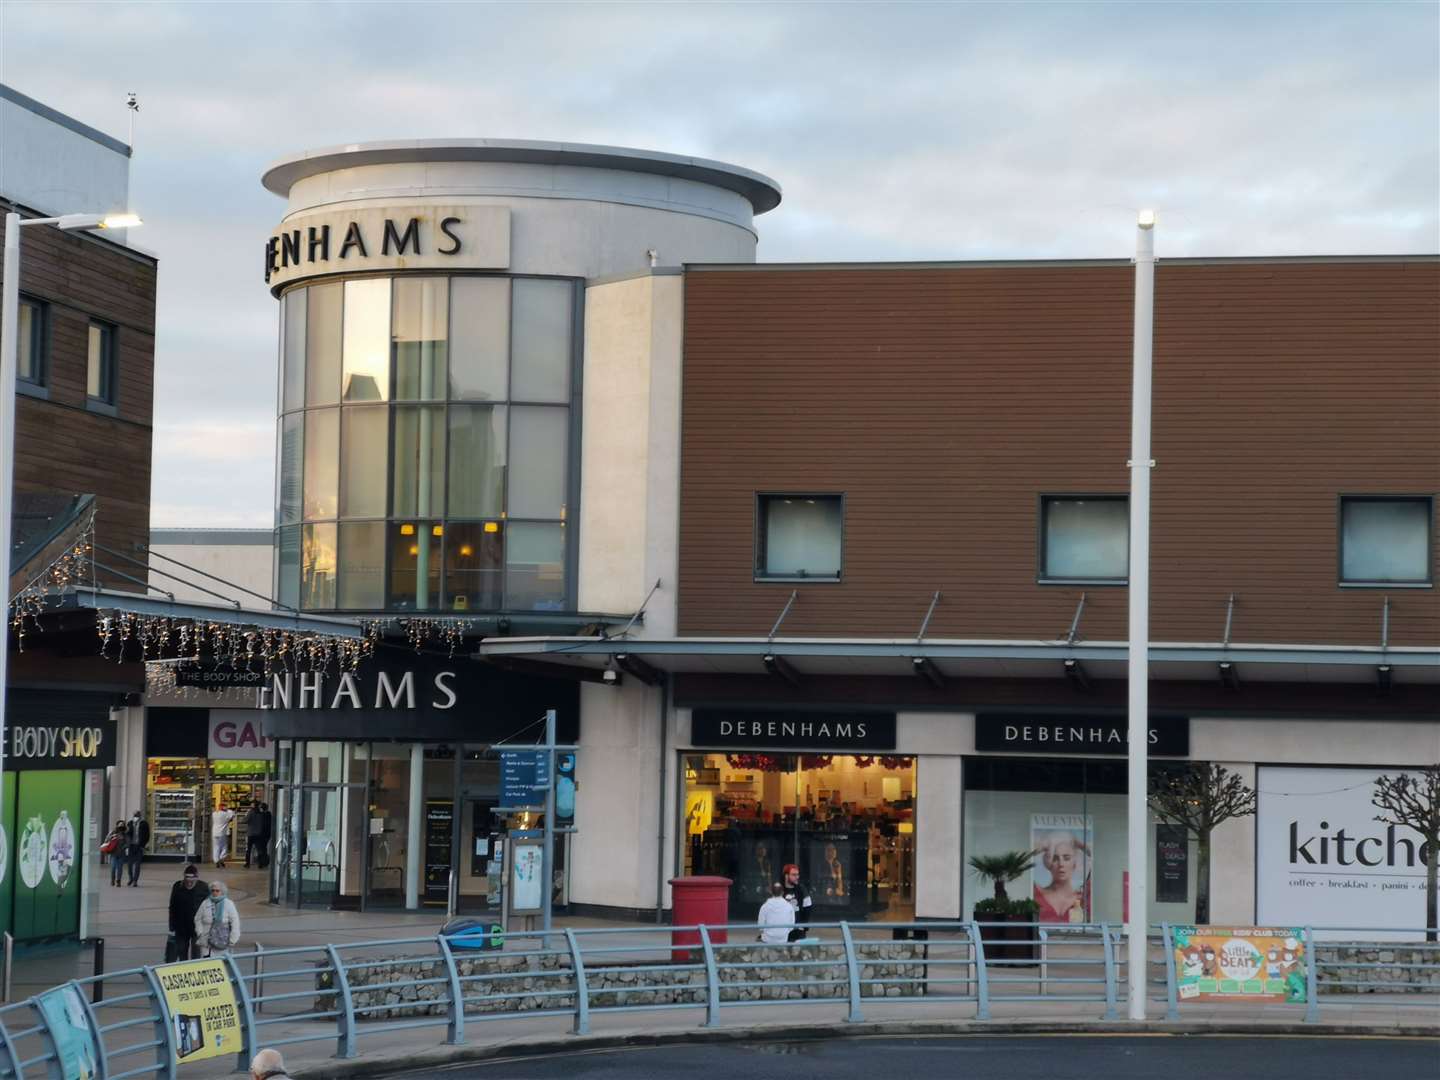 Jump Inc will be opening in the former Debenhams at Westwood Cross in Broadstairs. Picture: Marijke Hall